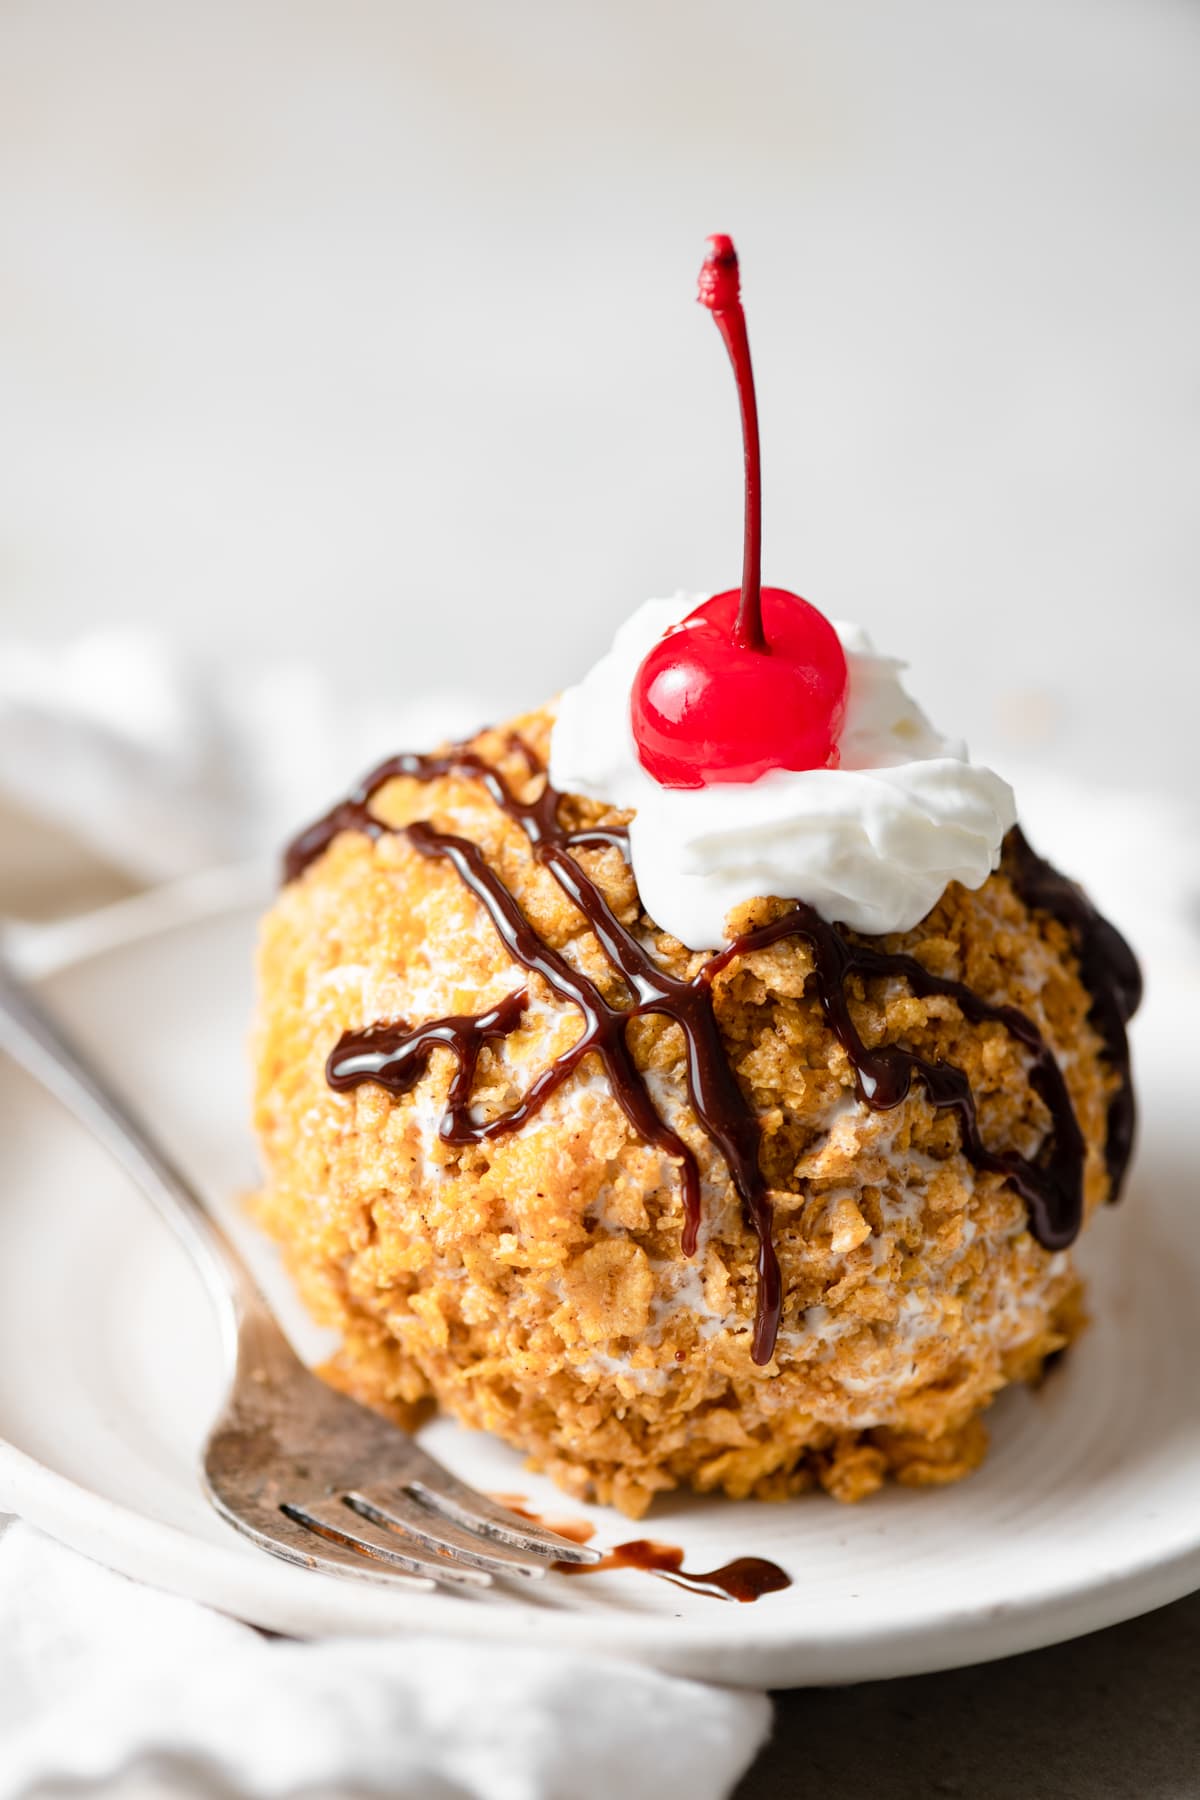 Close up image of fried ice cream on a dessert plate with fork on the left side.